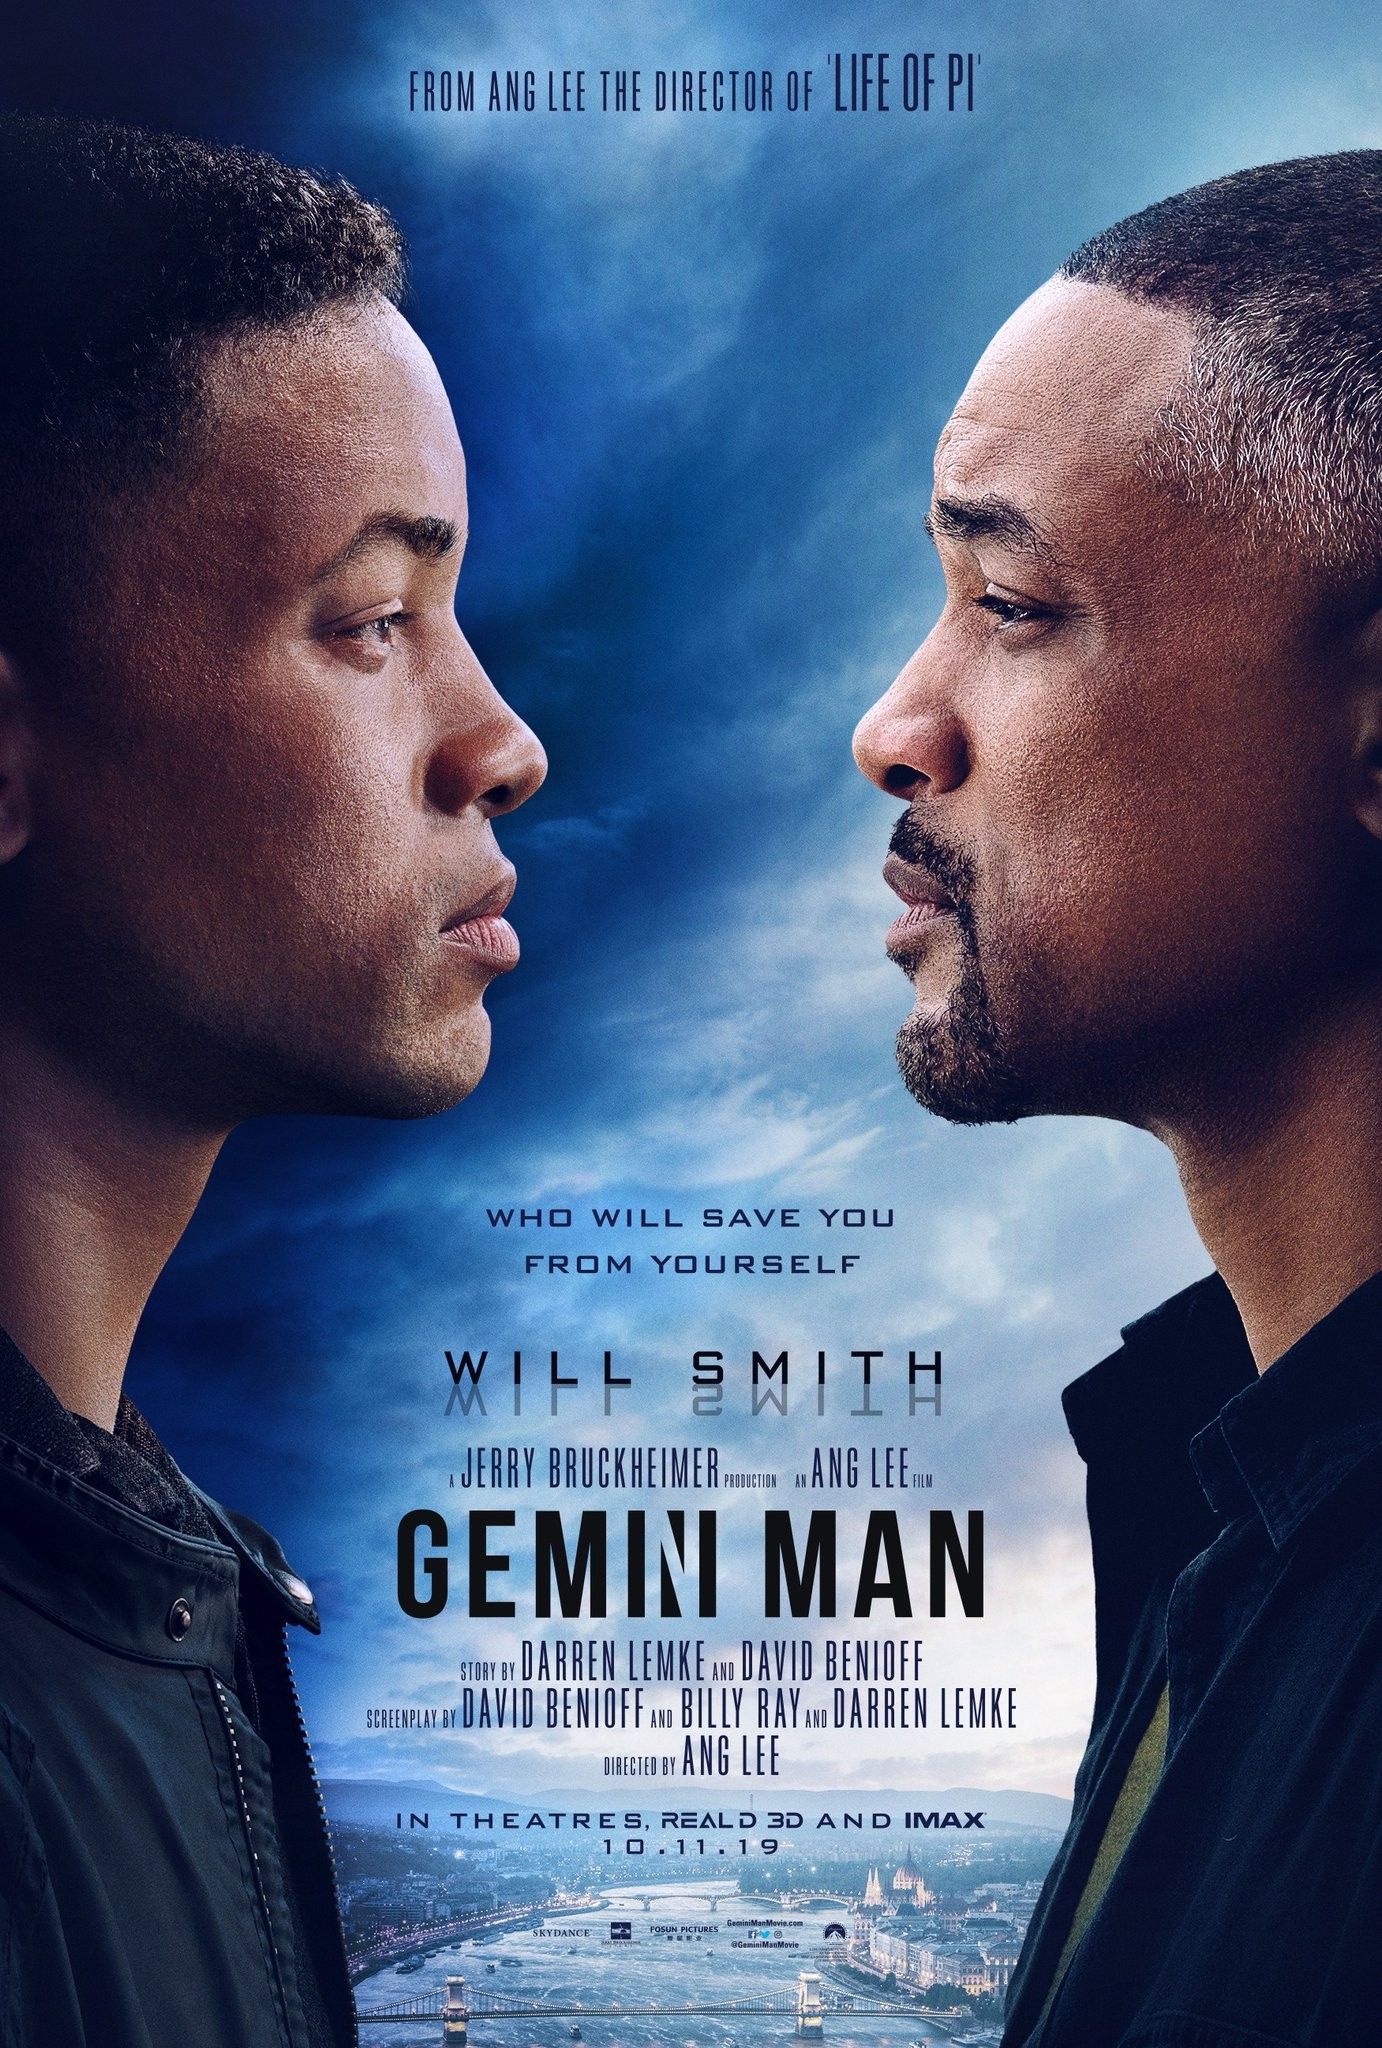 Gemini Man Poster with Will Smith